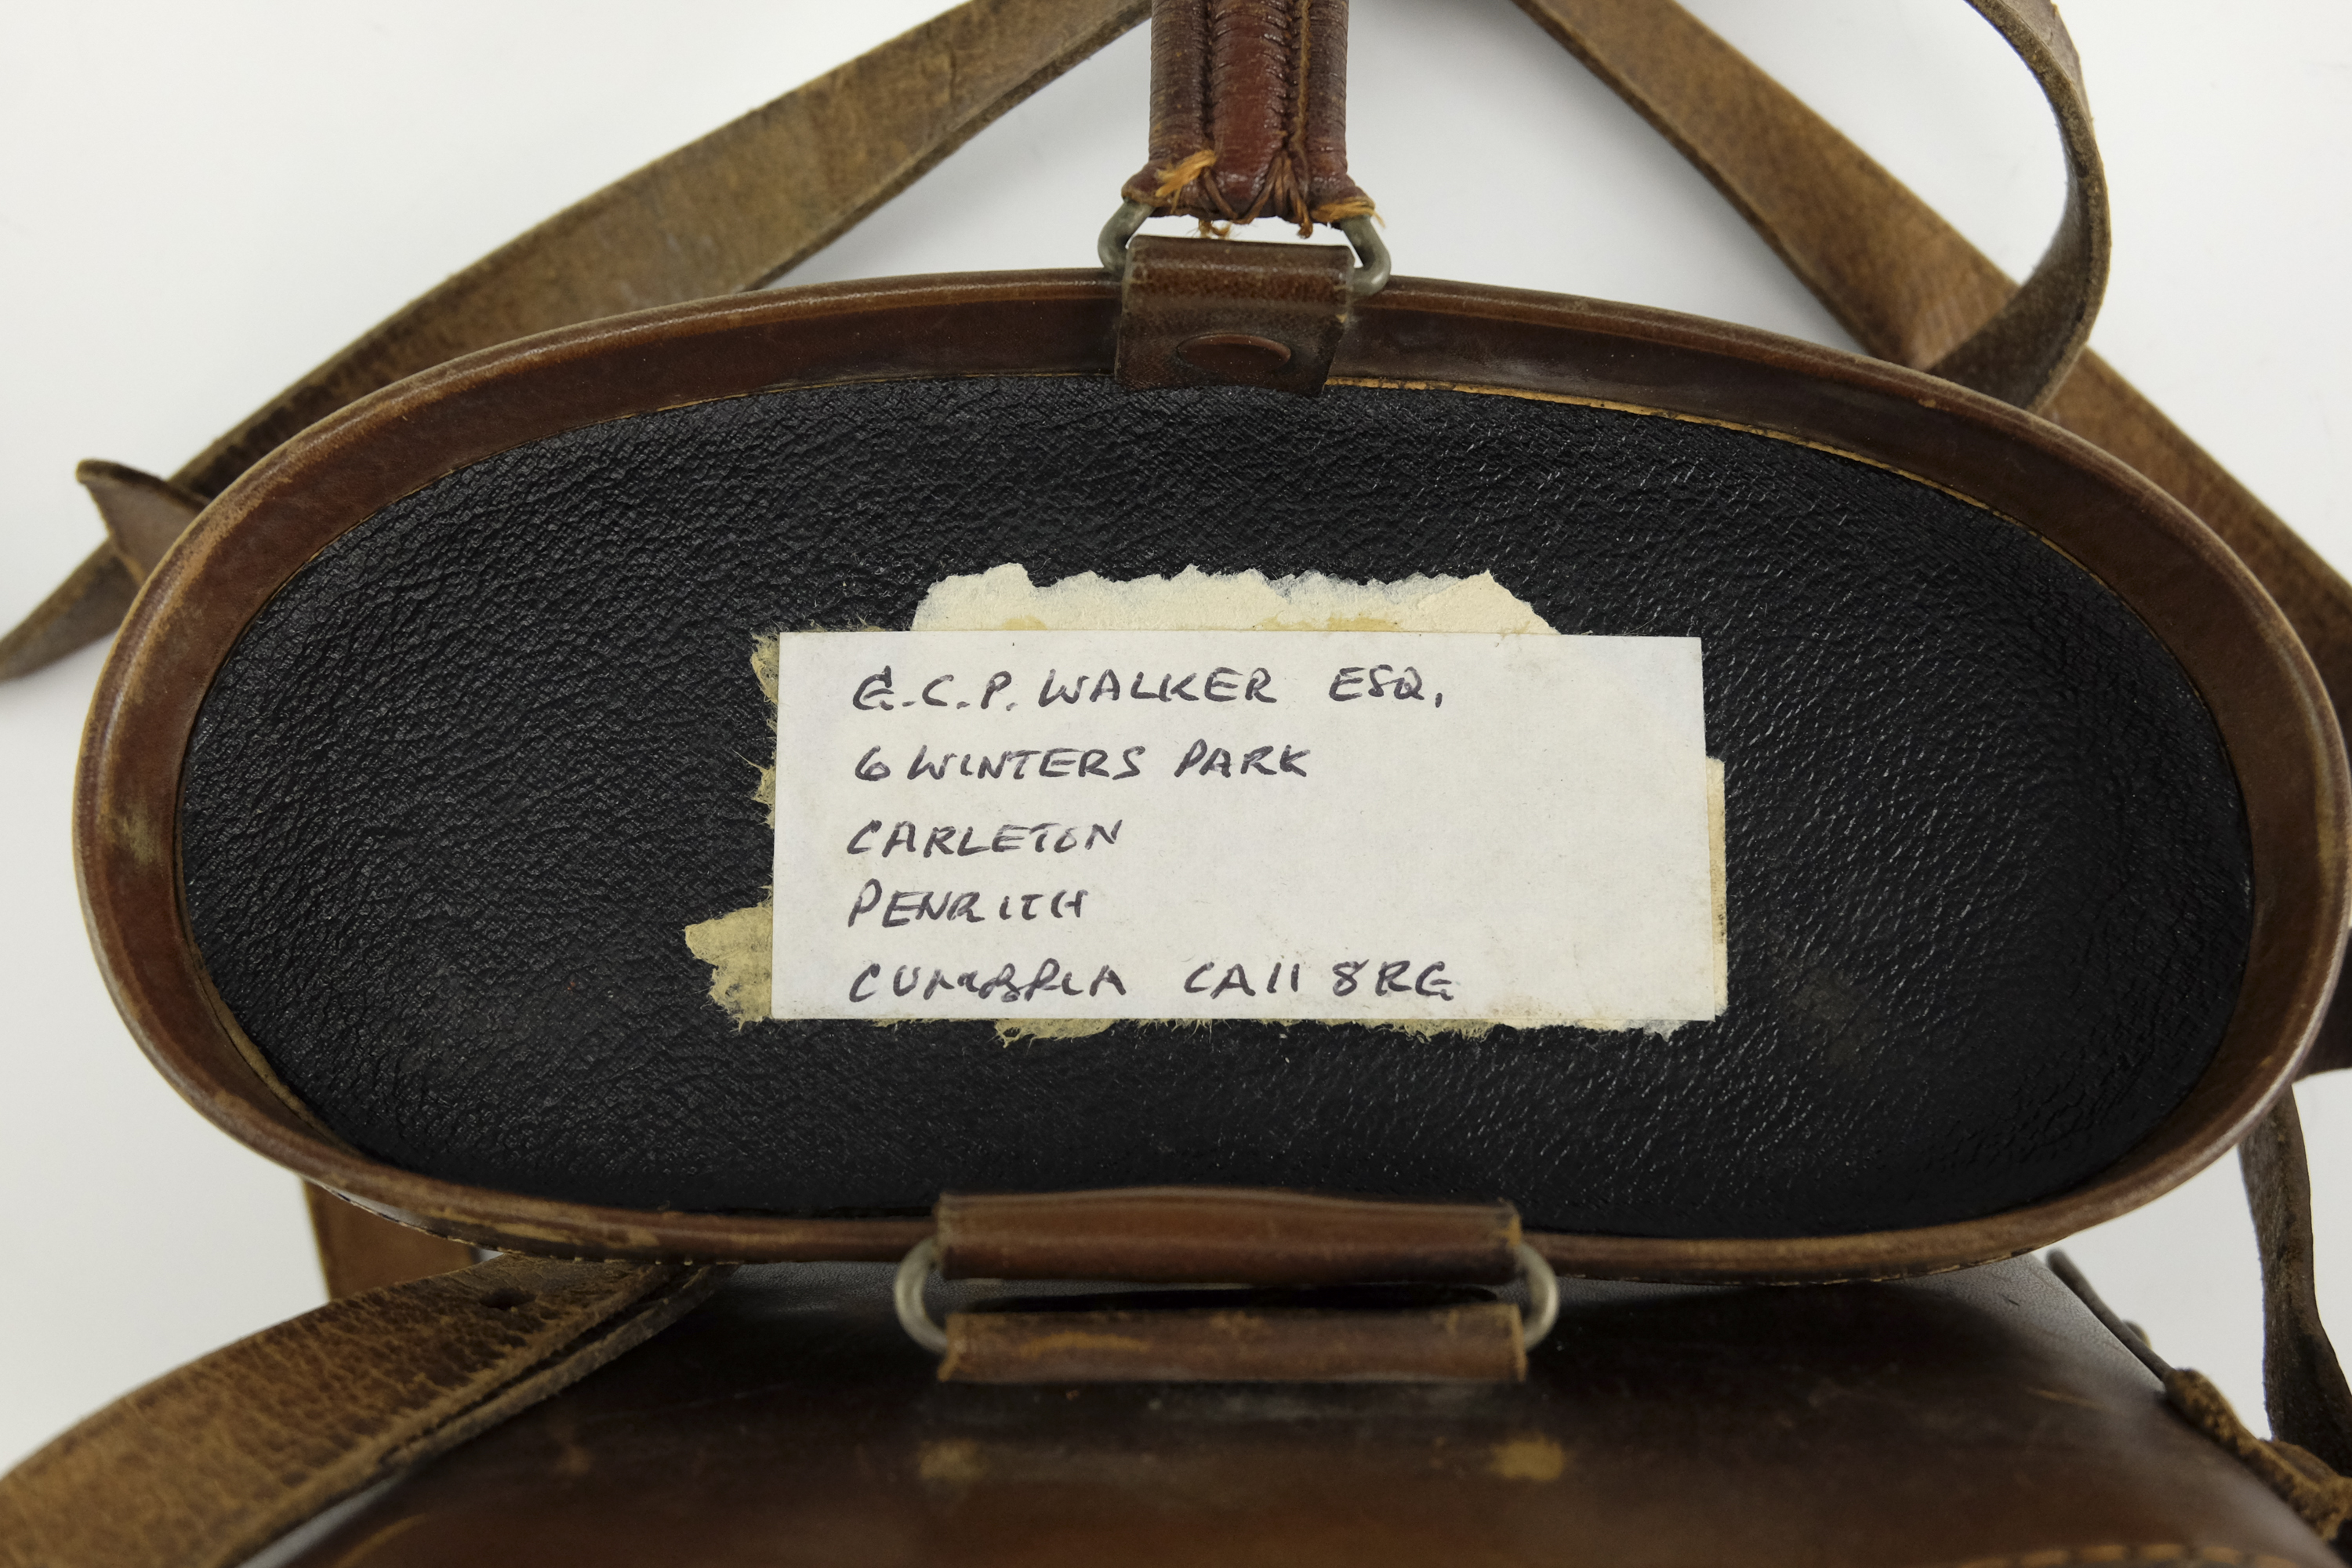 A pair of Carl Zeiss Jena 8x24 binoculars, in leather case - Image 2 of 4